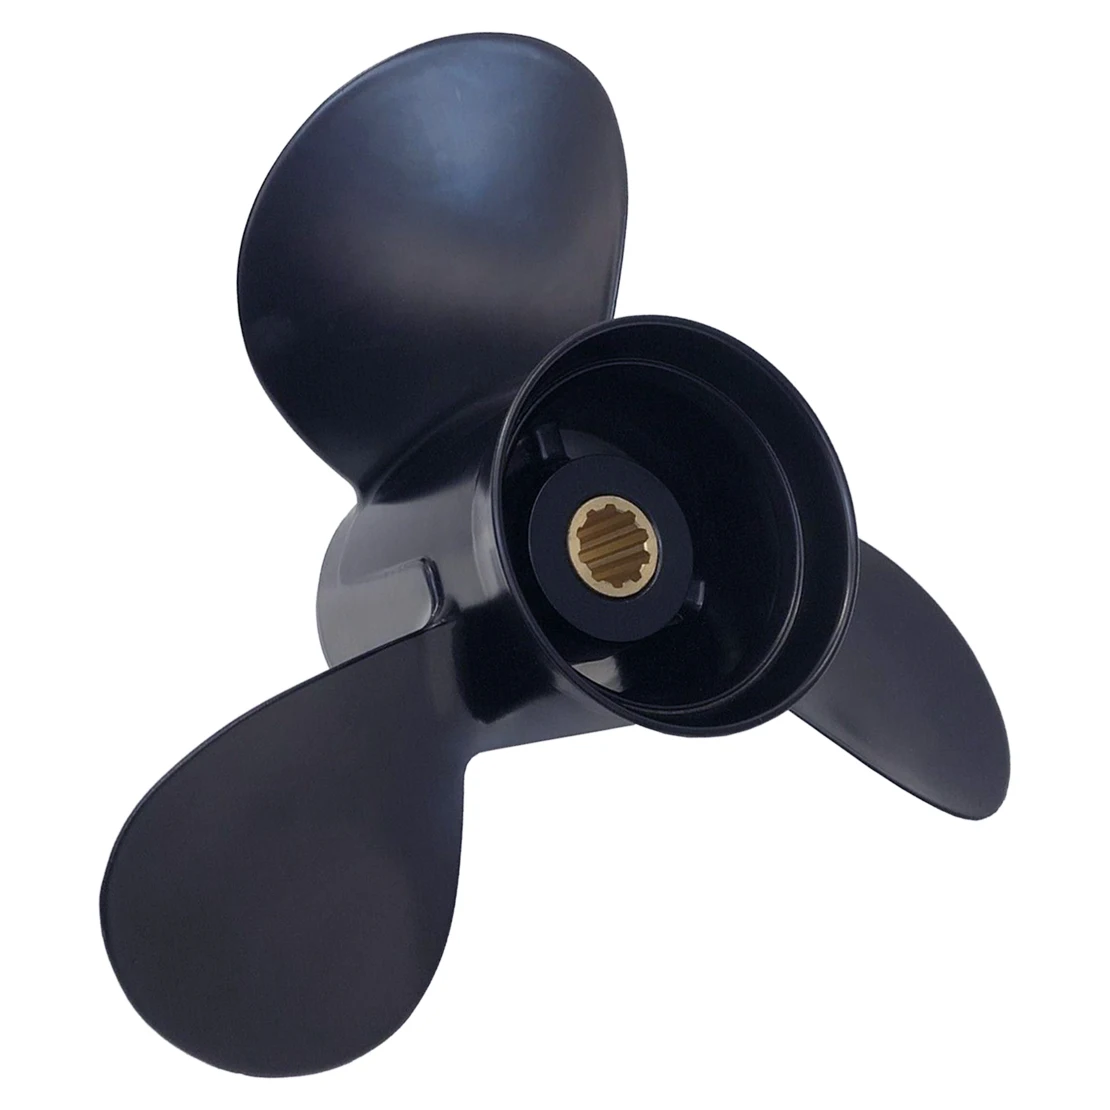 Black Aluminum Alloy Boat Propeller Fit for Mercury Mariner Tohatsu Nissan Outboard 25-30HP 48-19640A40 346-64104-5 3R0B645270